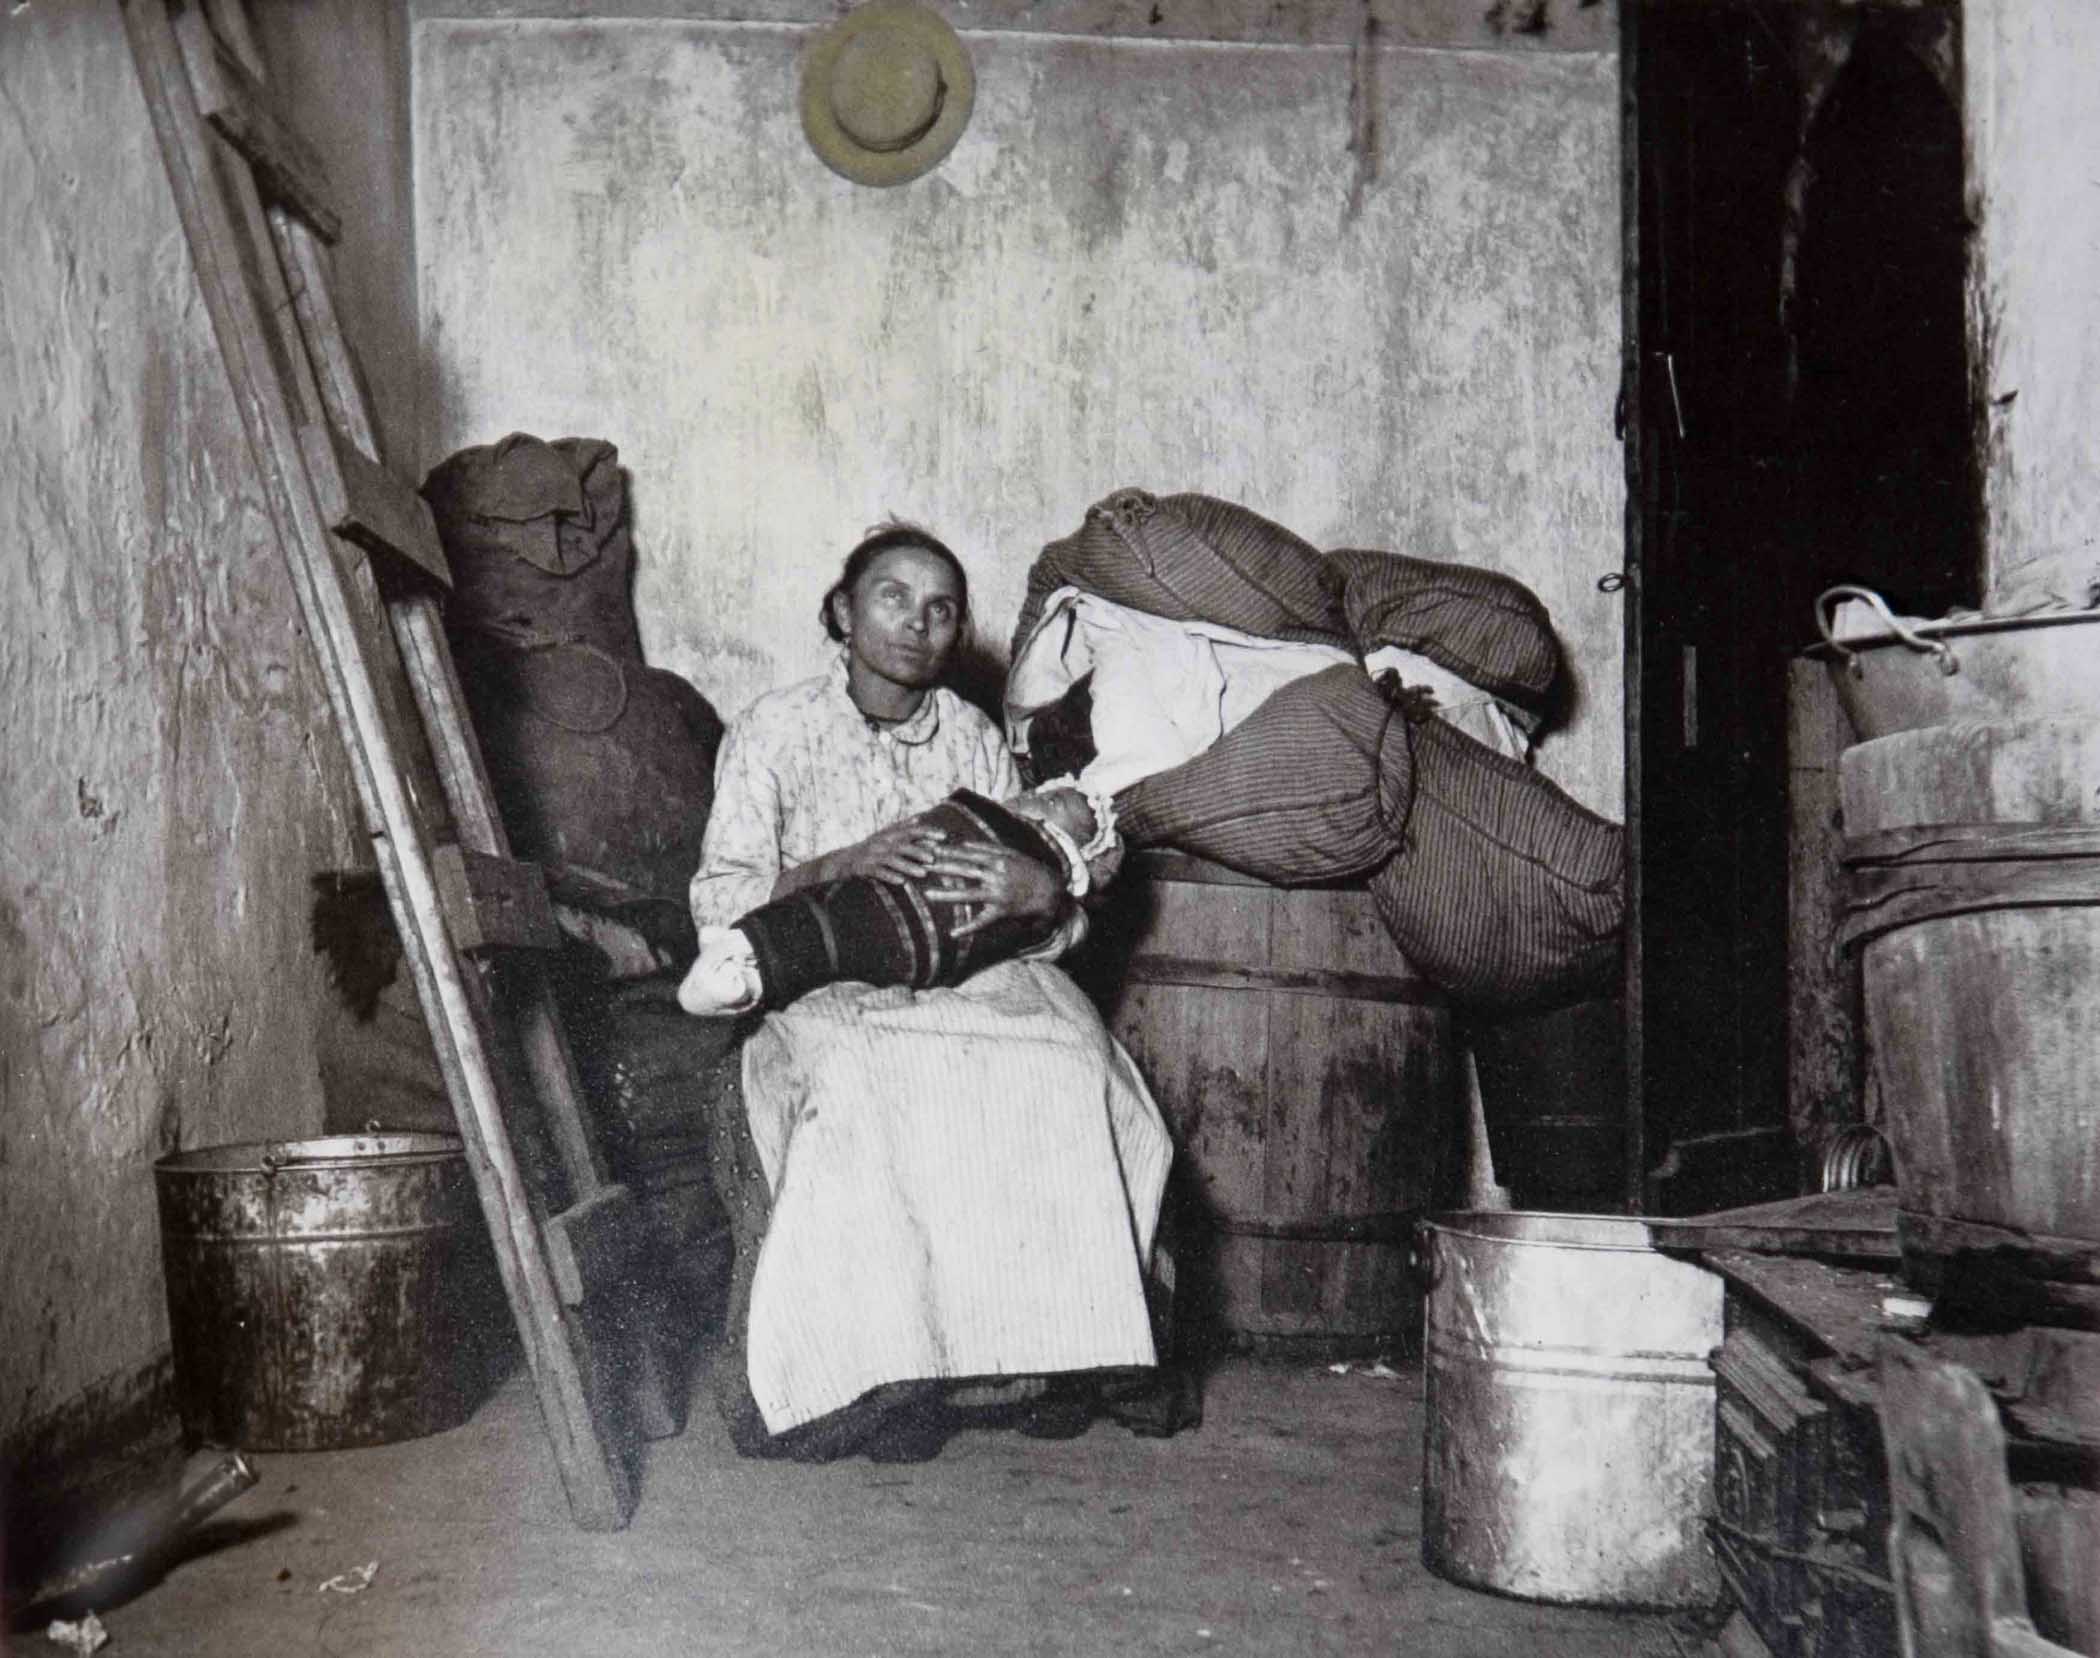 Jacob Riis' "The Lower East Side Madona," slightly colorized to emphasize the halo effect in Riis' composition.